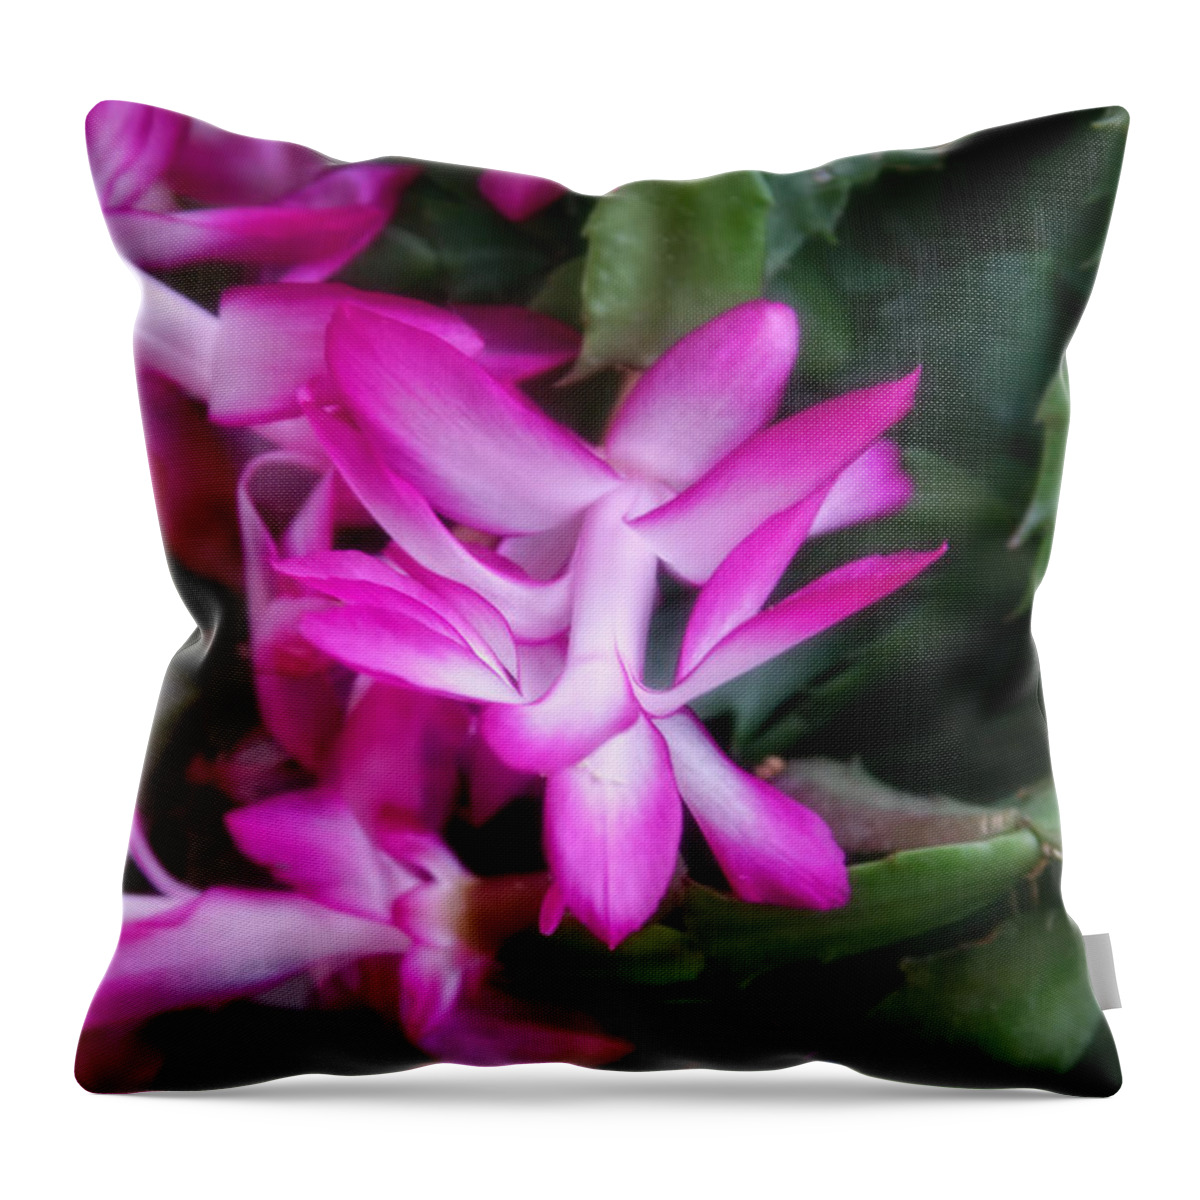 Flower Throw Pillow featuring the photograph Christmas Cactus by Joan Bertucci